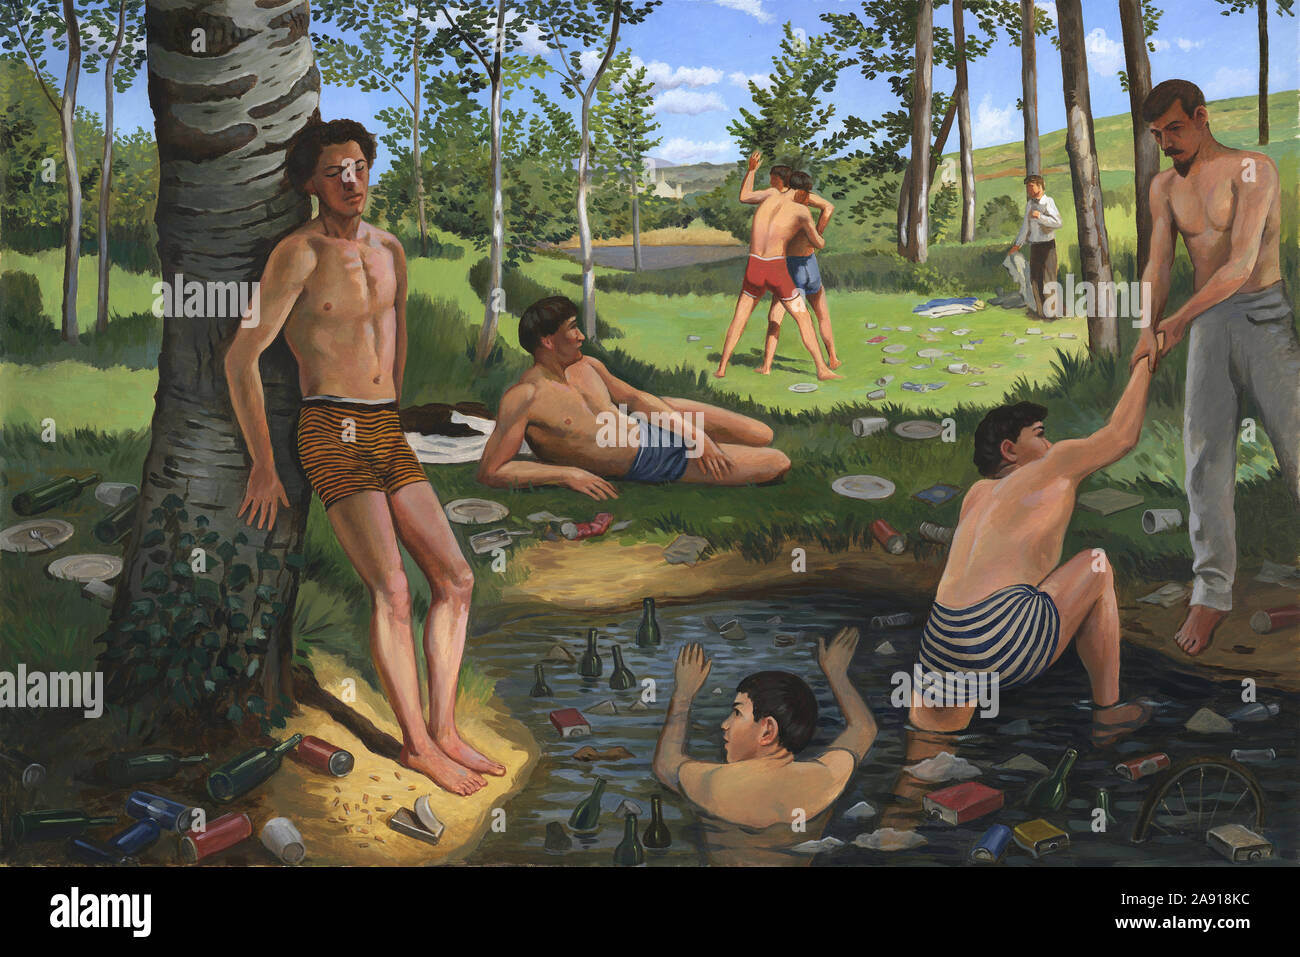 Parody of Bazille's 'Summer Scene' with lots of added rubbish Stock Photo